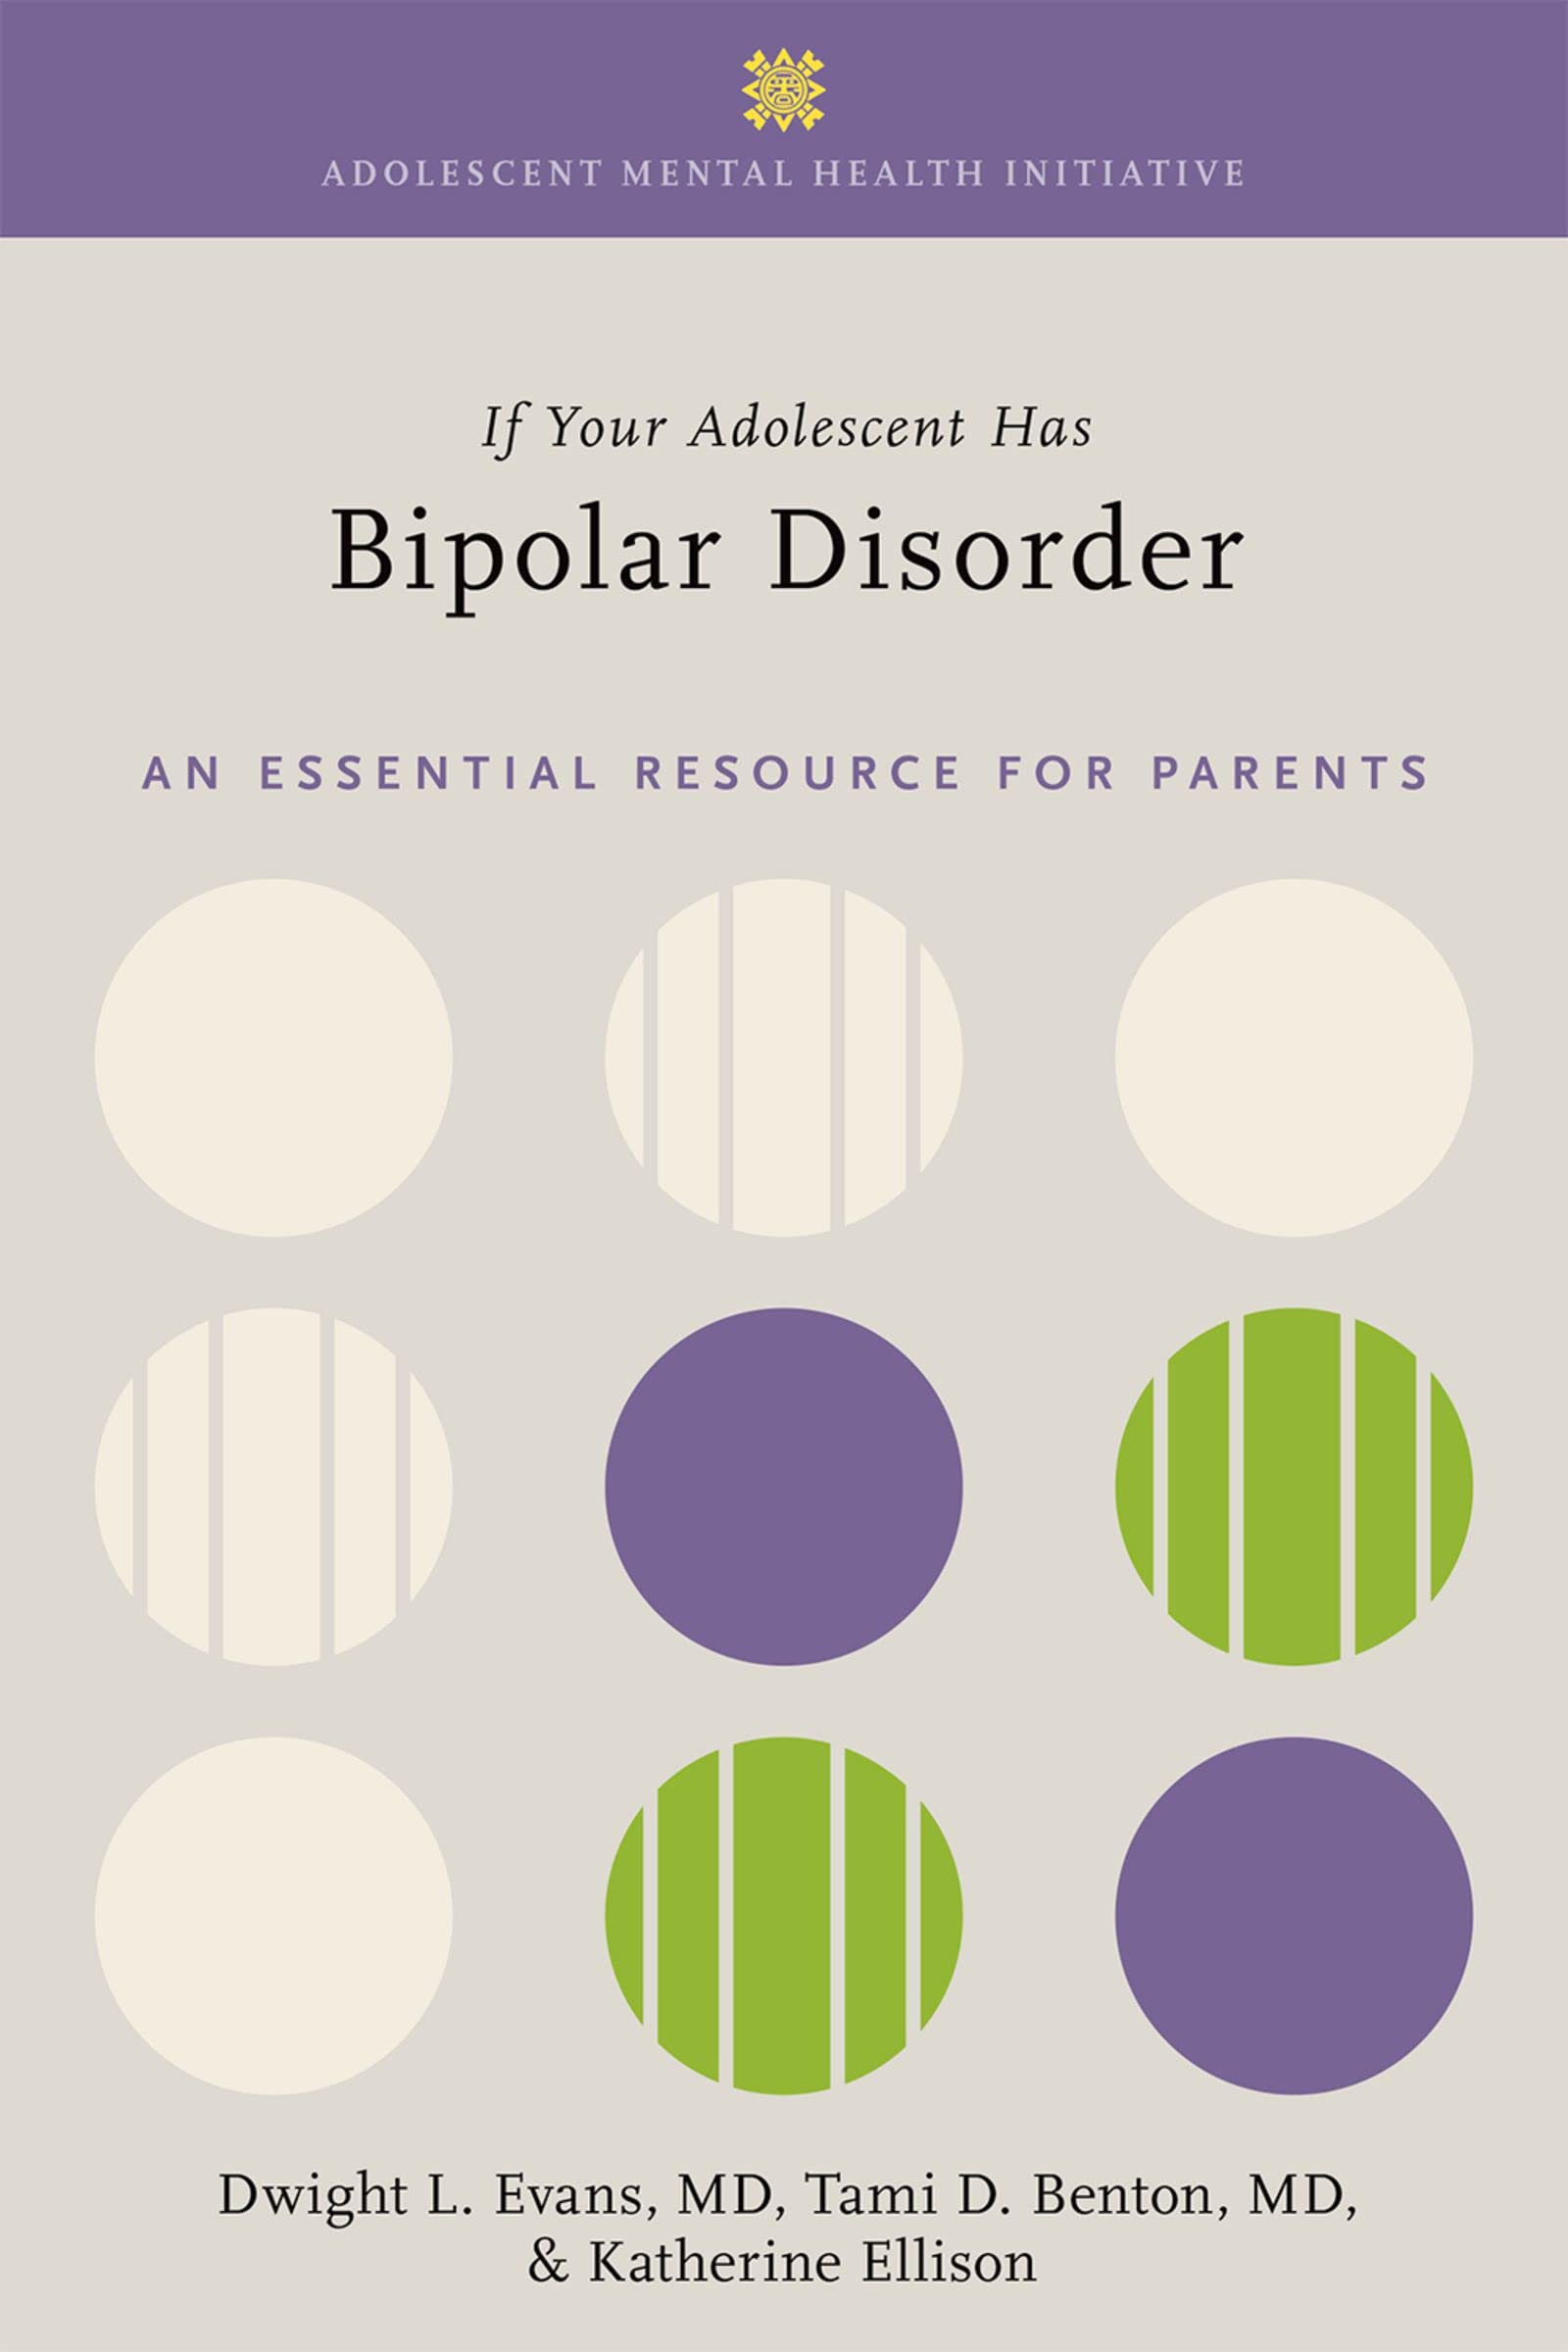 If Your Adolescent Has Bipolar Disorder: An Essential Resource for Parents (ADOLESCENT MENTAL HEALTH INITIATIVE) by Dwight L. Evans 